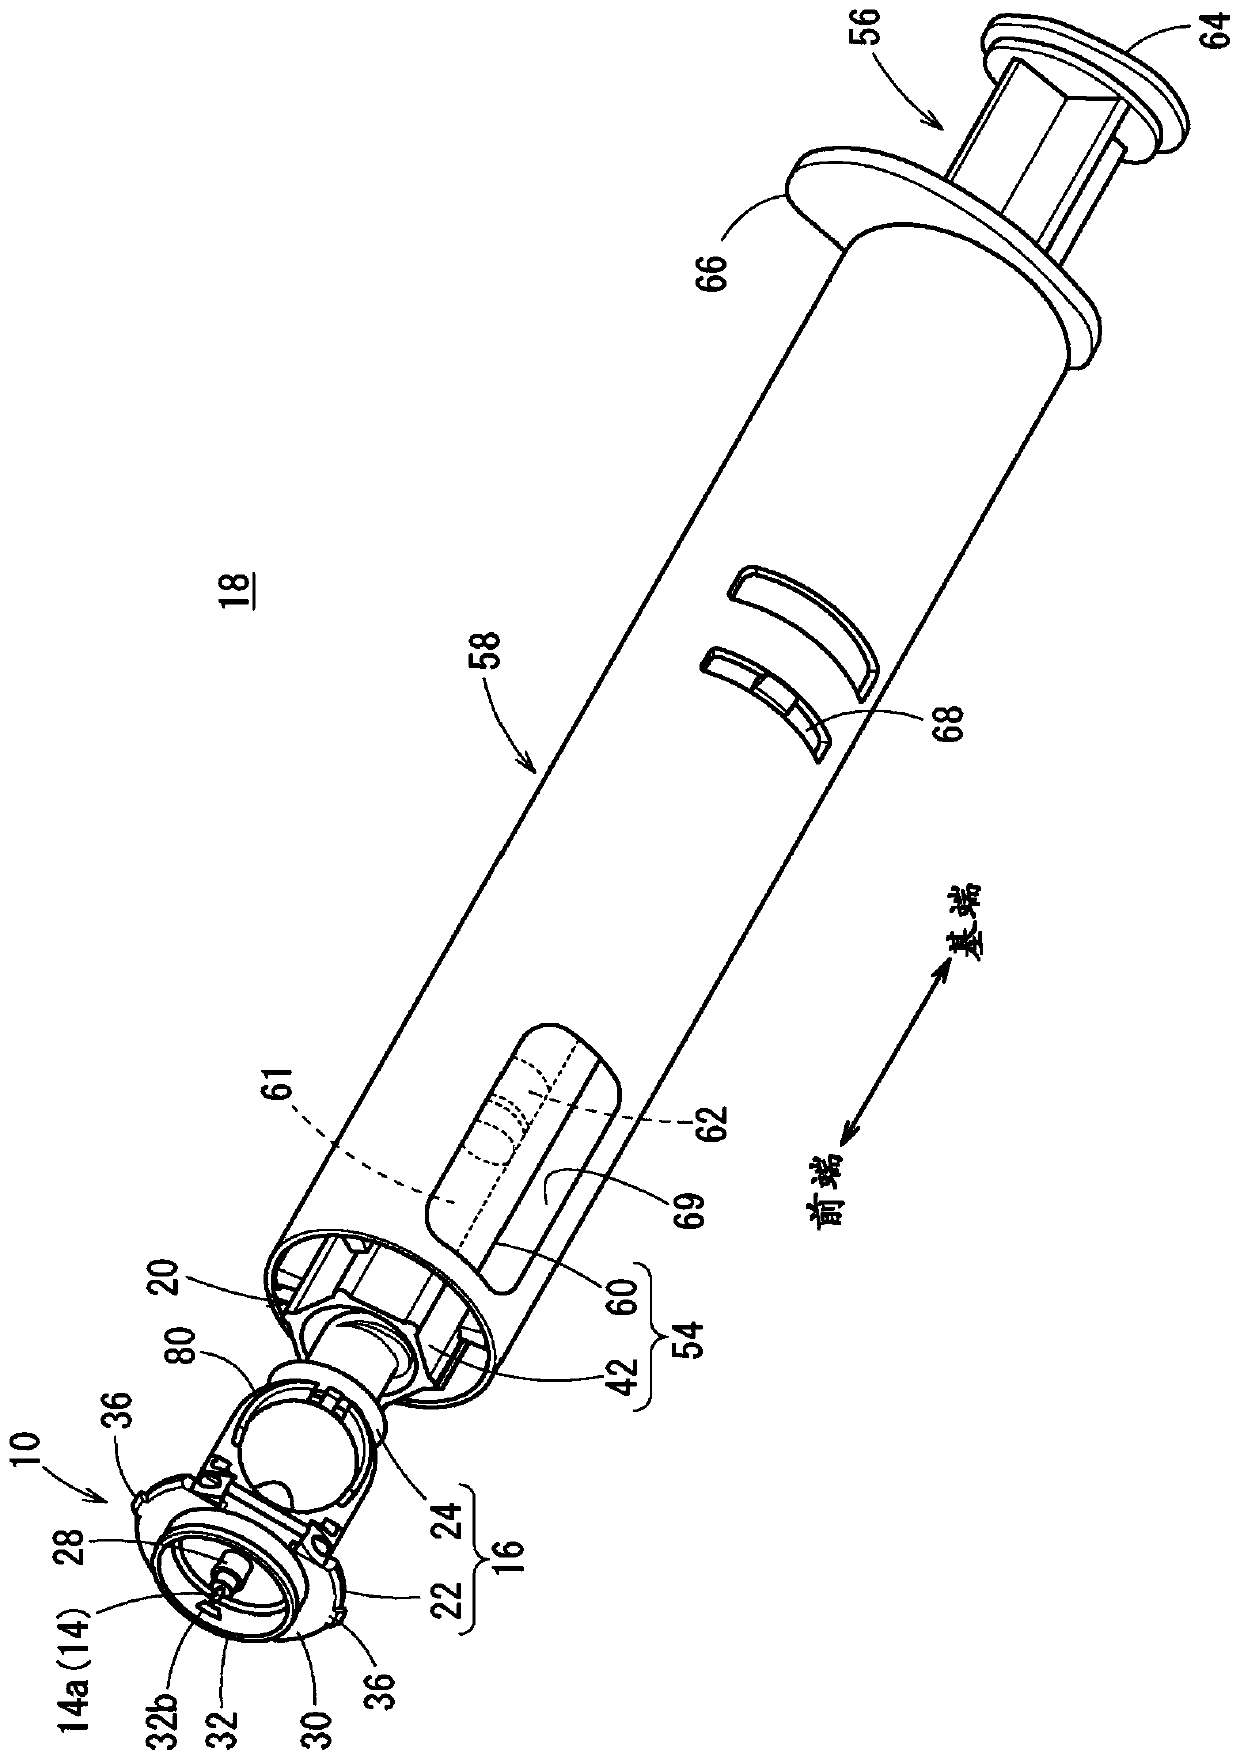 Intradermal needle, packaged product thereof, and injection device